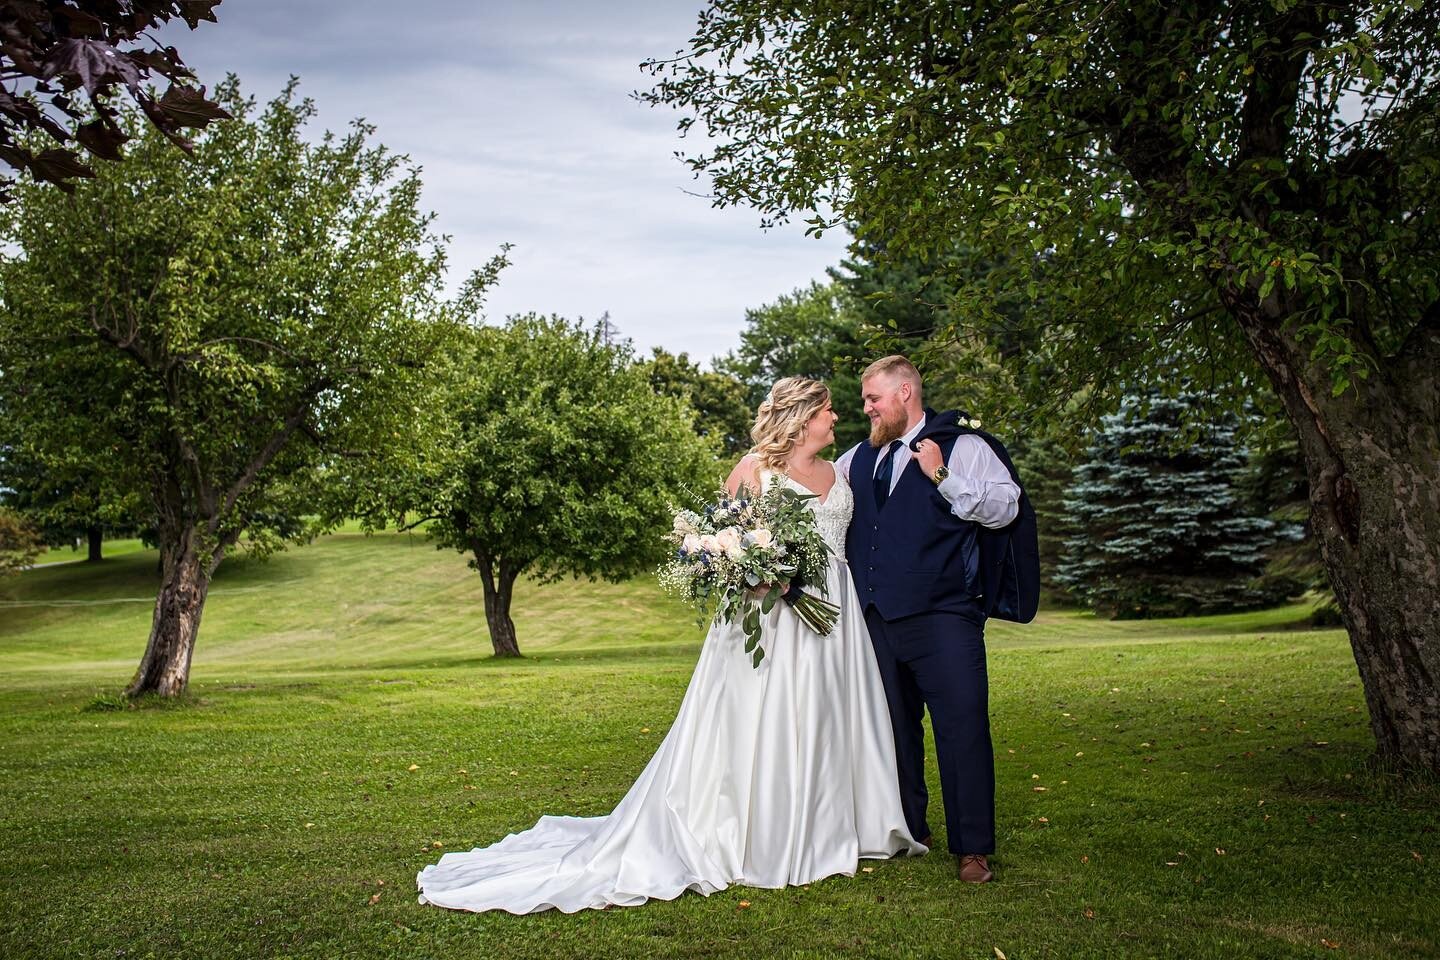 .
DAY 14 📆 TOP 21 PHOTO SHOOTS OF 2021 🥳 
---------------------------------------------
Another gorgeous Summer day from last year was when we shot Cam &amp; Taylor's wedding in July ☀️ They held their ceremony &amp; reception at a popular local Ba